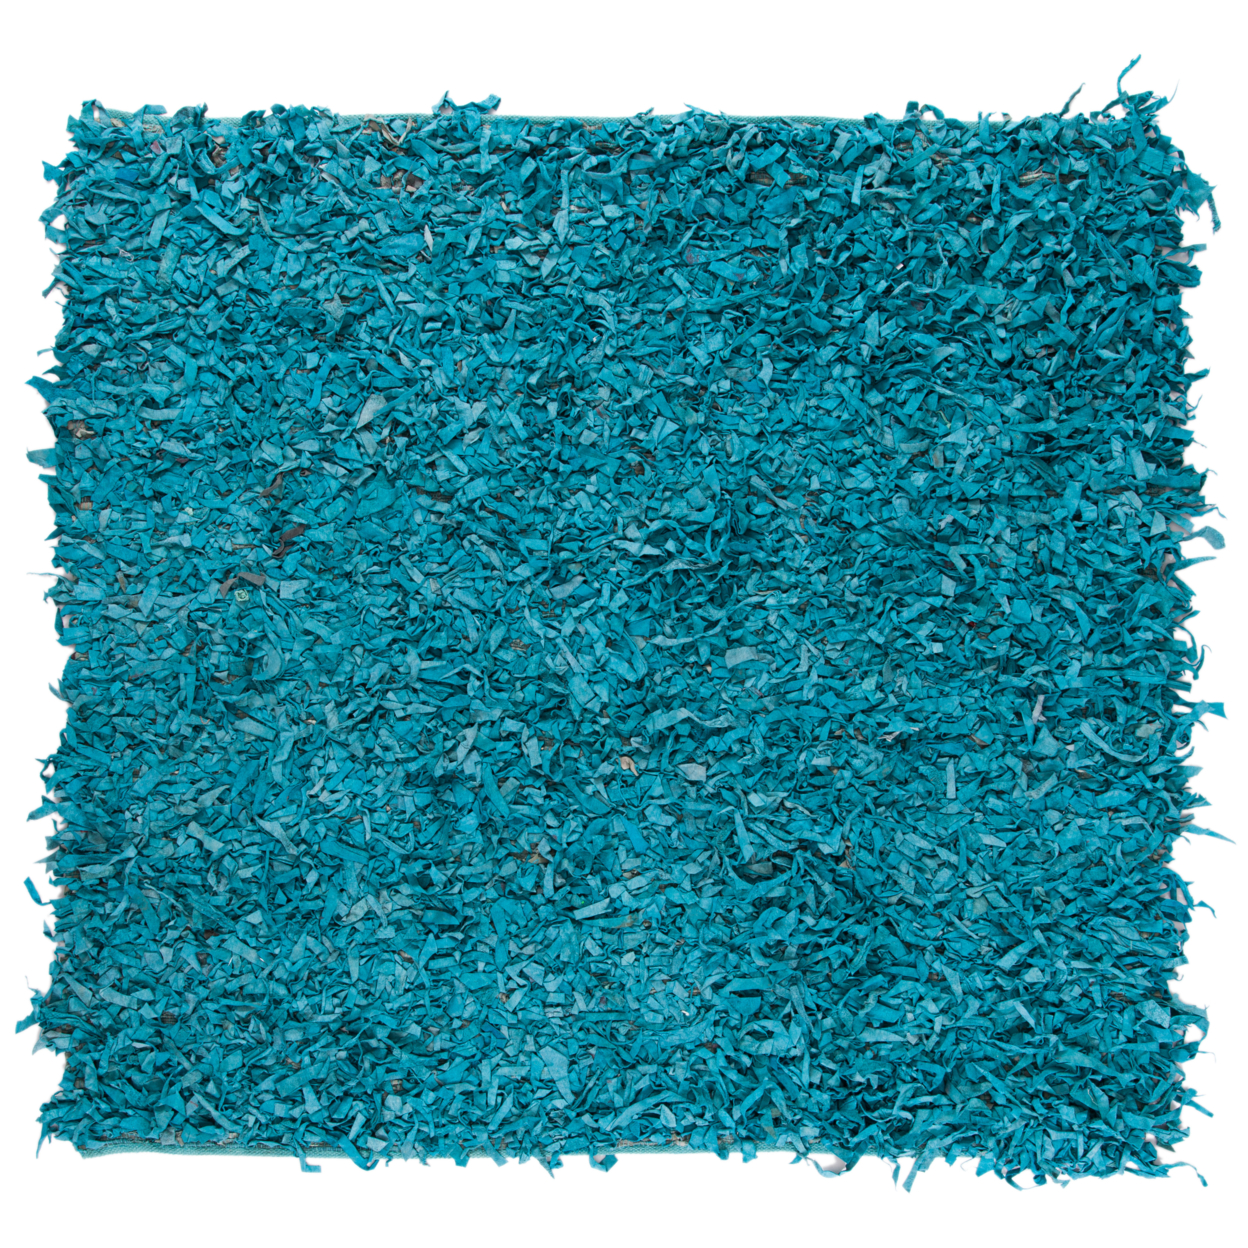 SAFAVIEH Leather Shag LSG511L Hand-knotted Light Blue Rug - 8' Square